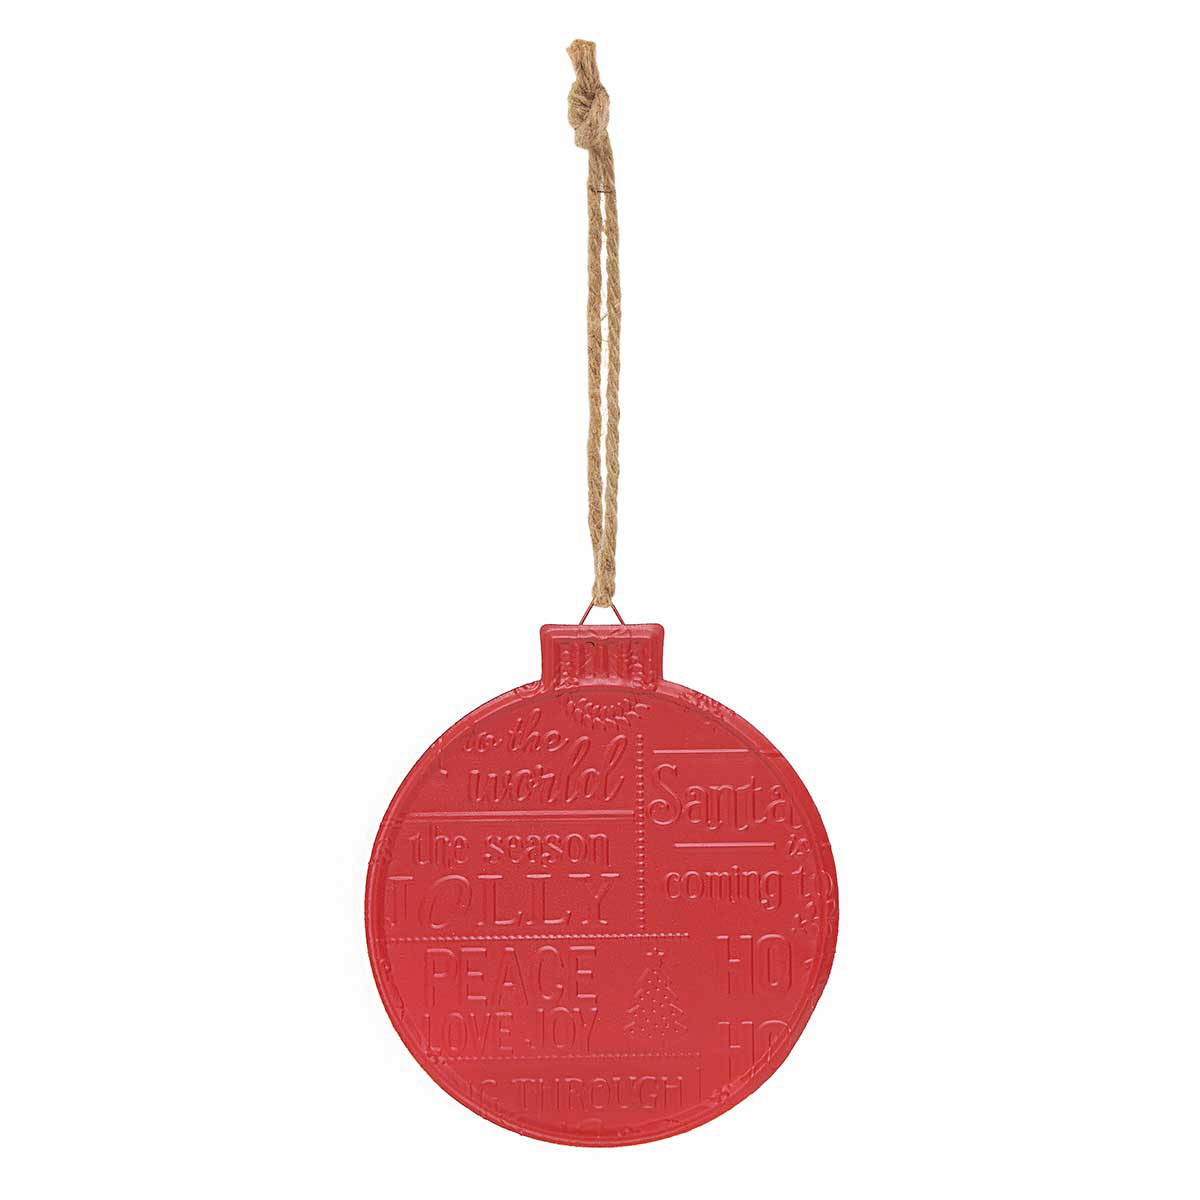 ORNAMENT CHRISTMAS ROUND RED 7IN X 7.75IN